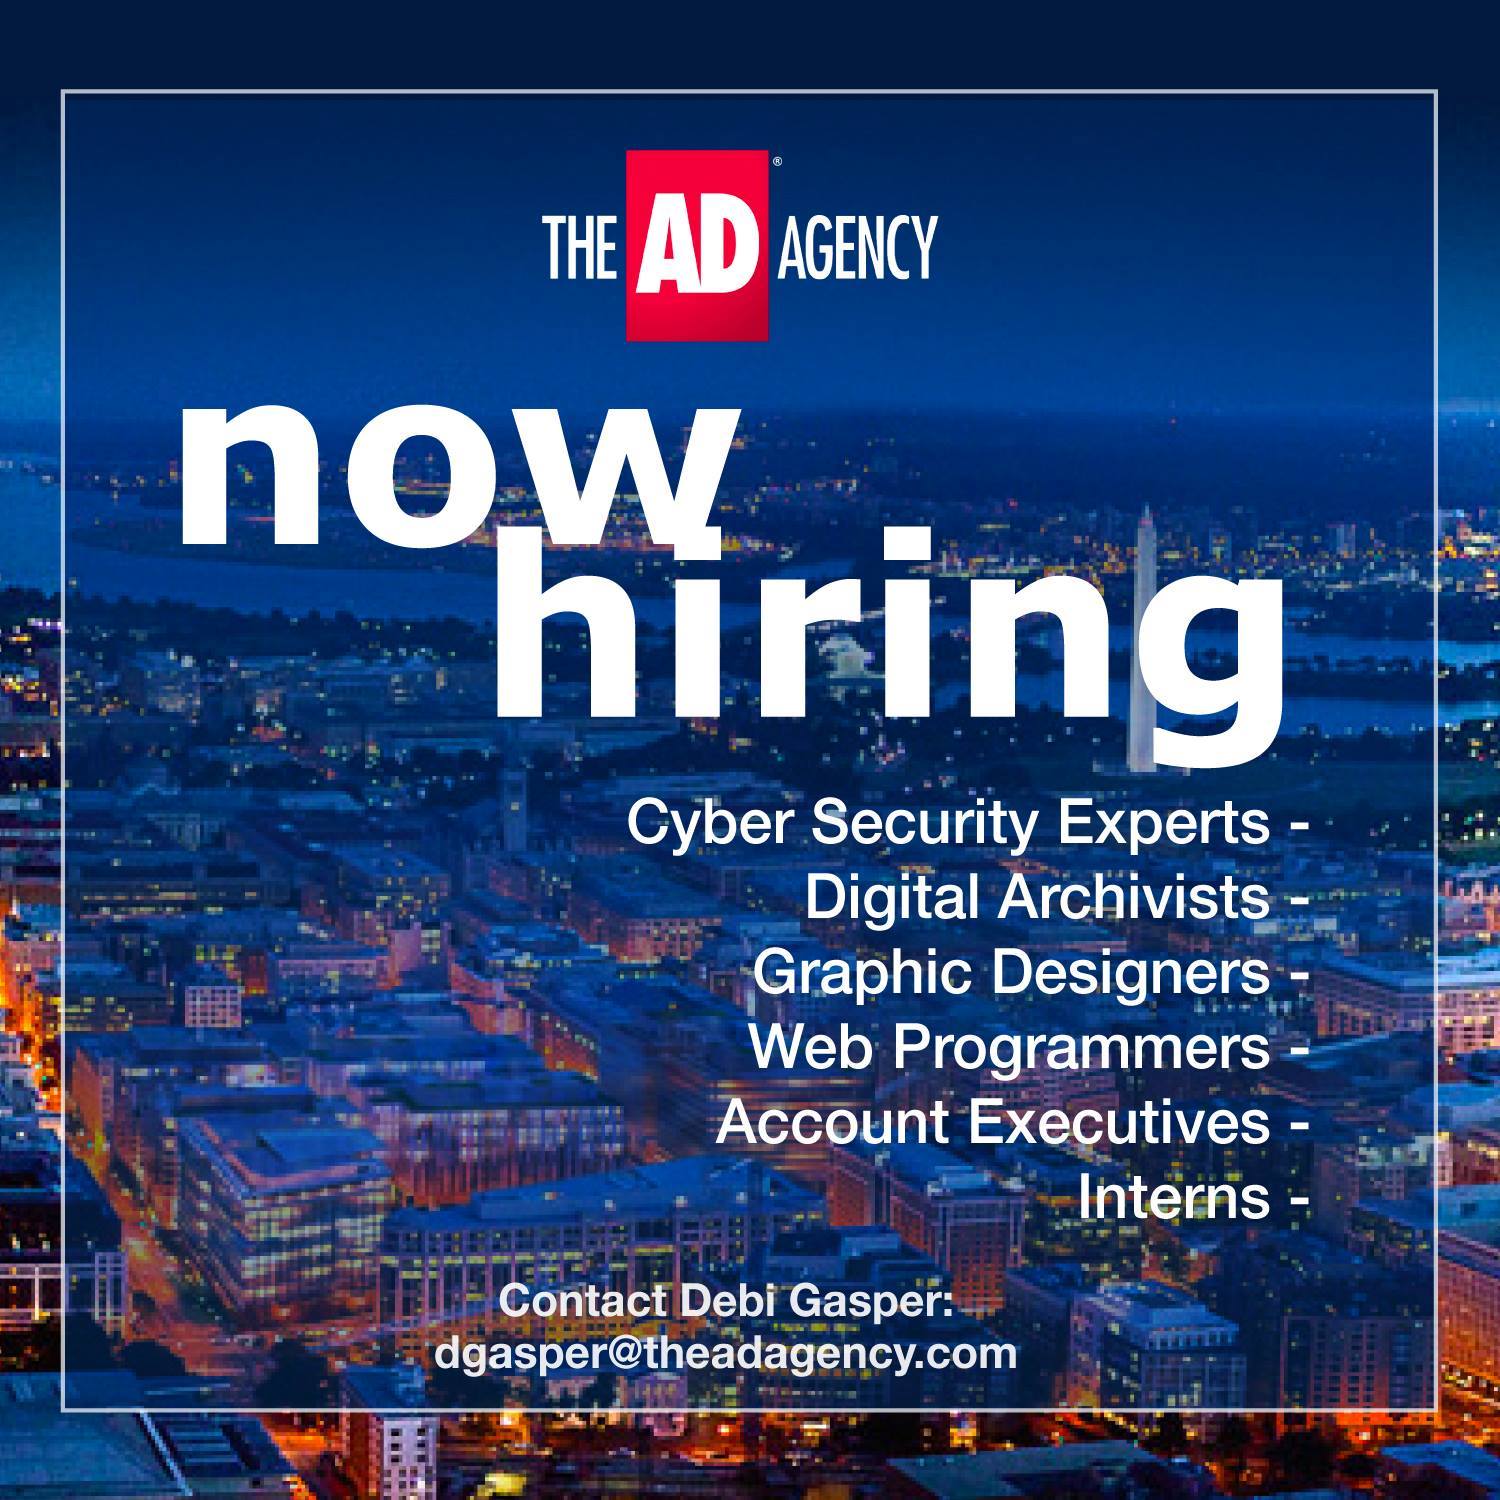 The AD Agency is now hiring!